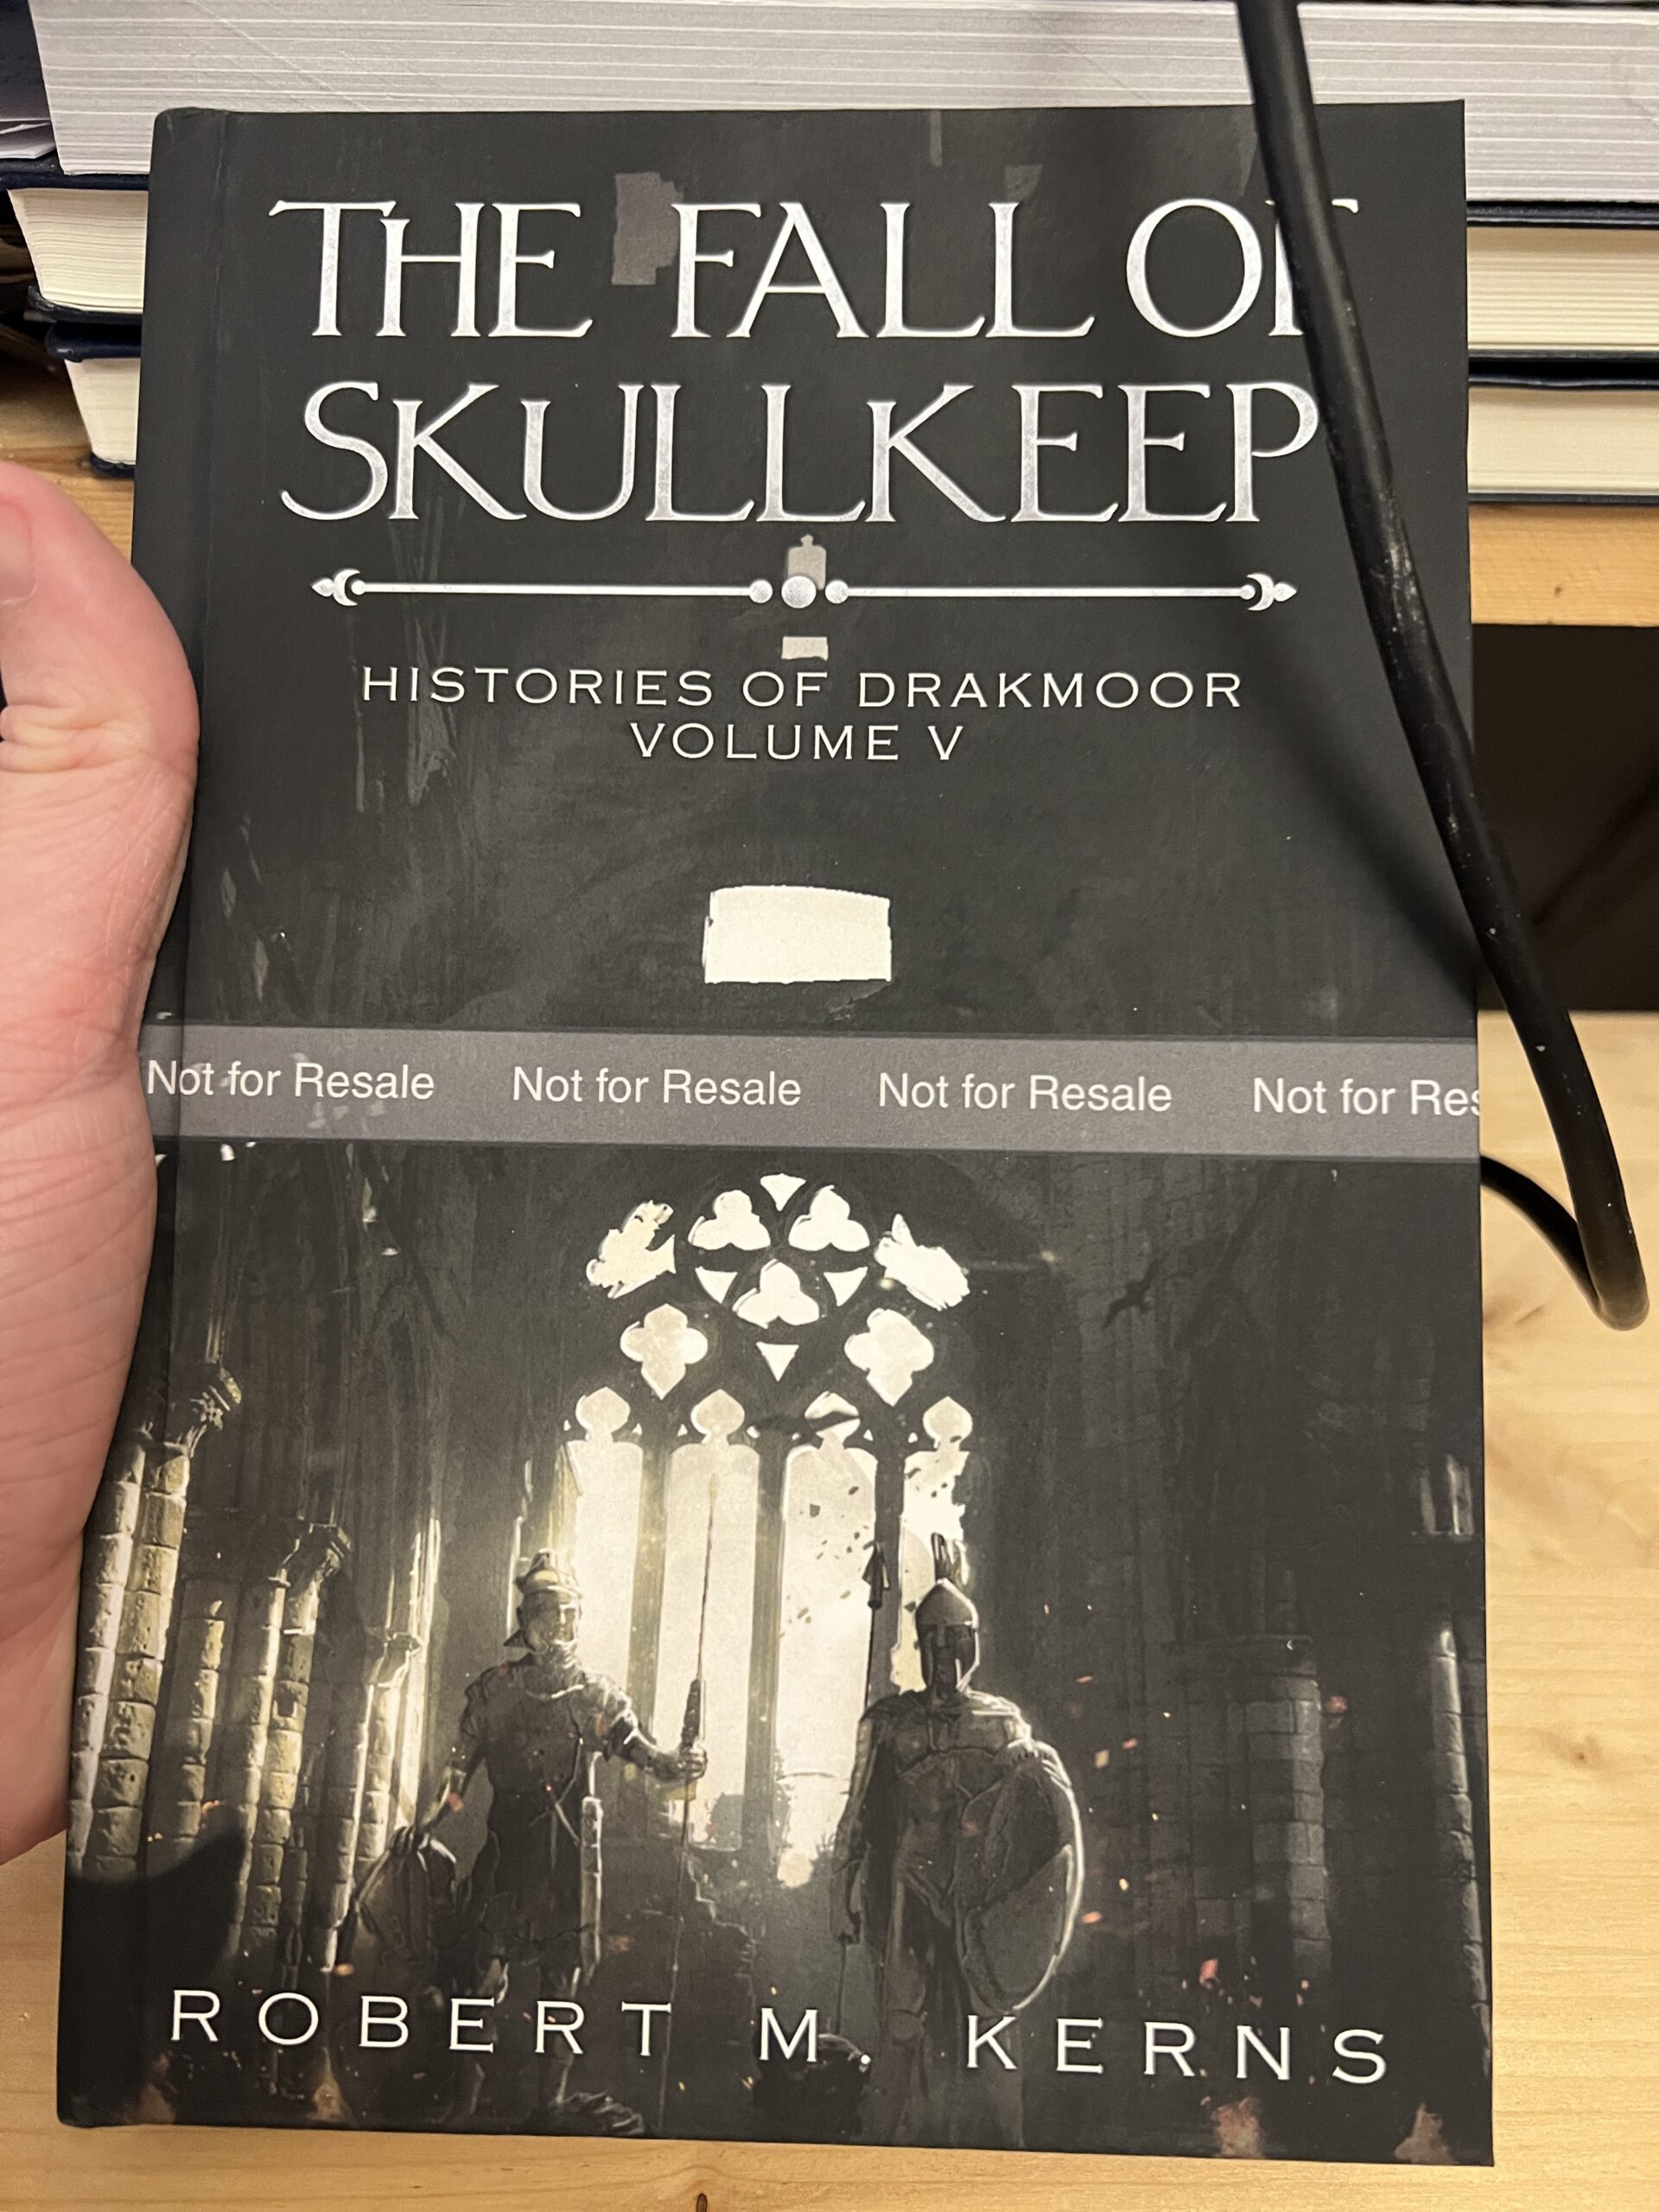 "The Fall of Skullkeep" in case-laminate hardcover